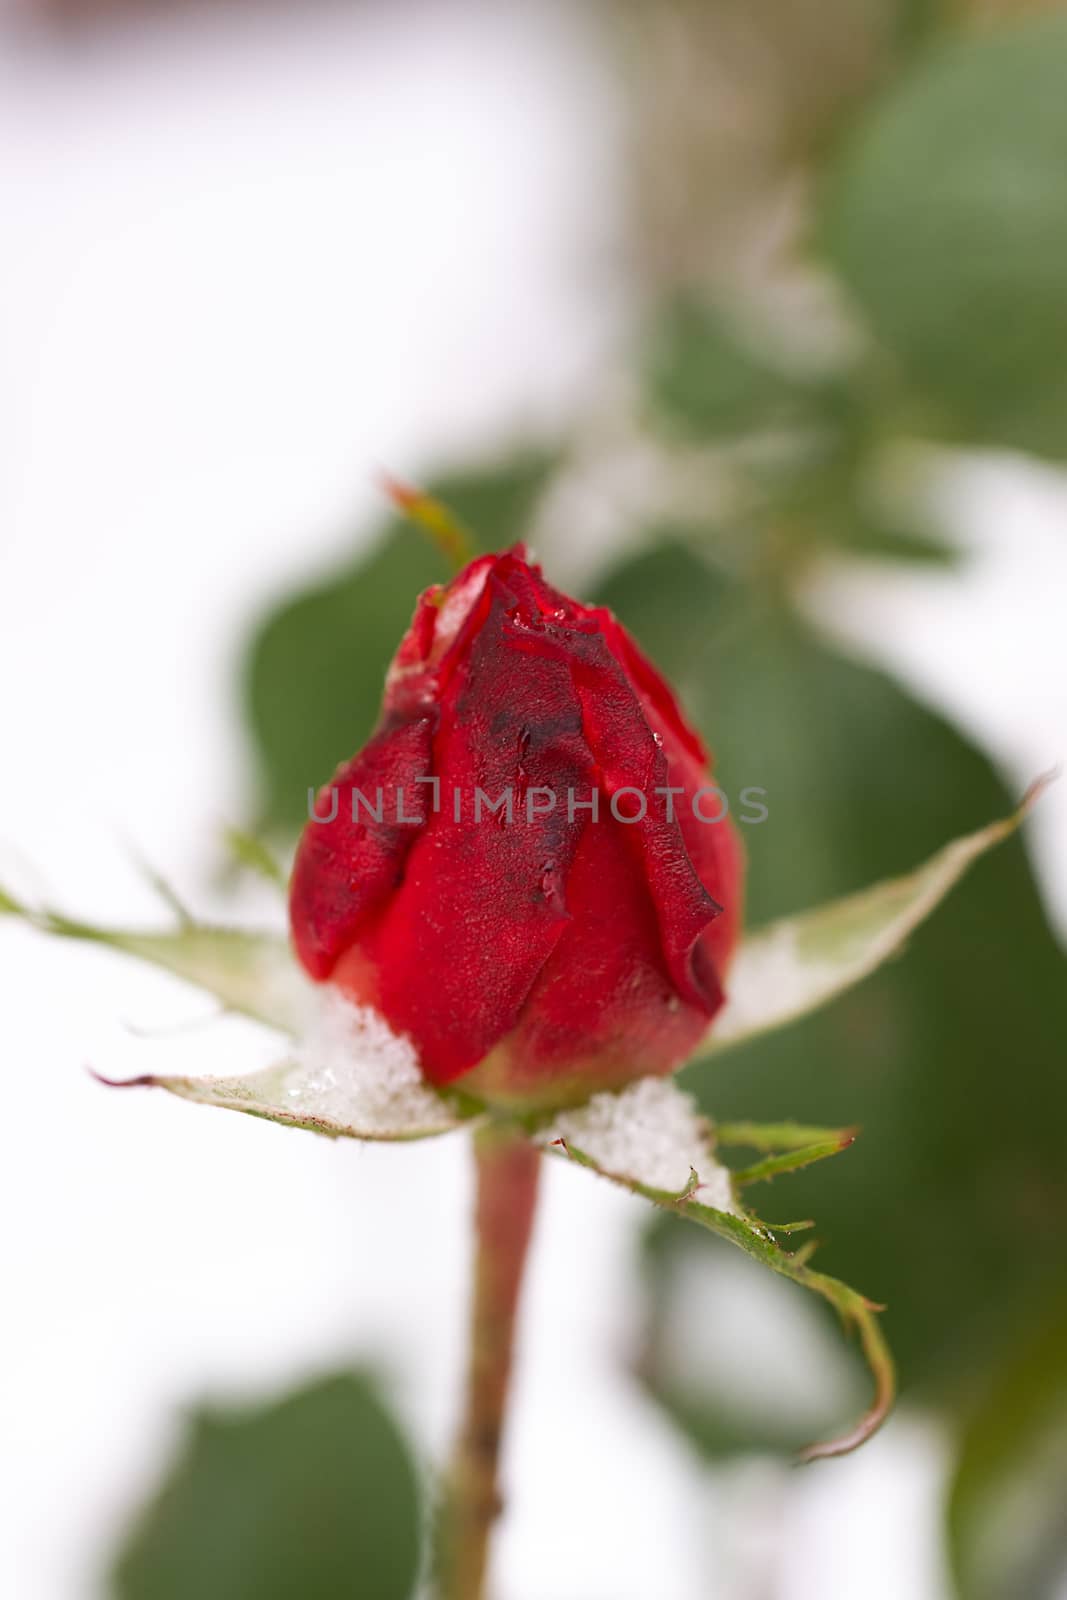 Closed frozen rose flower closeup on blurred winter background. Soft socus on rose.